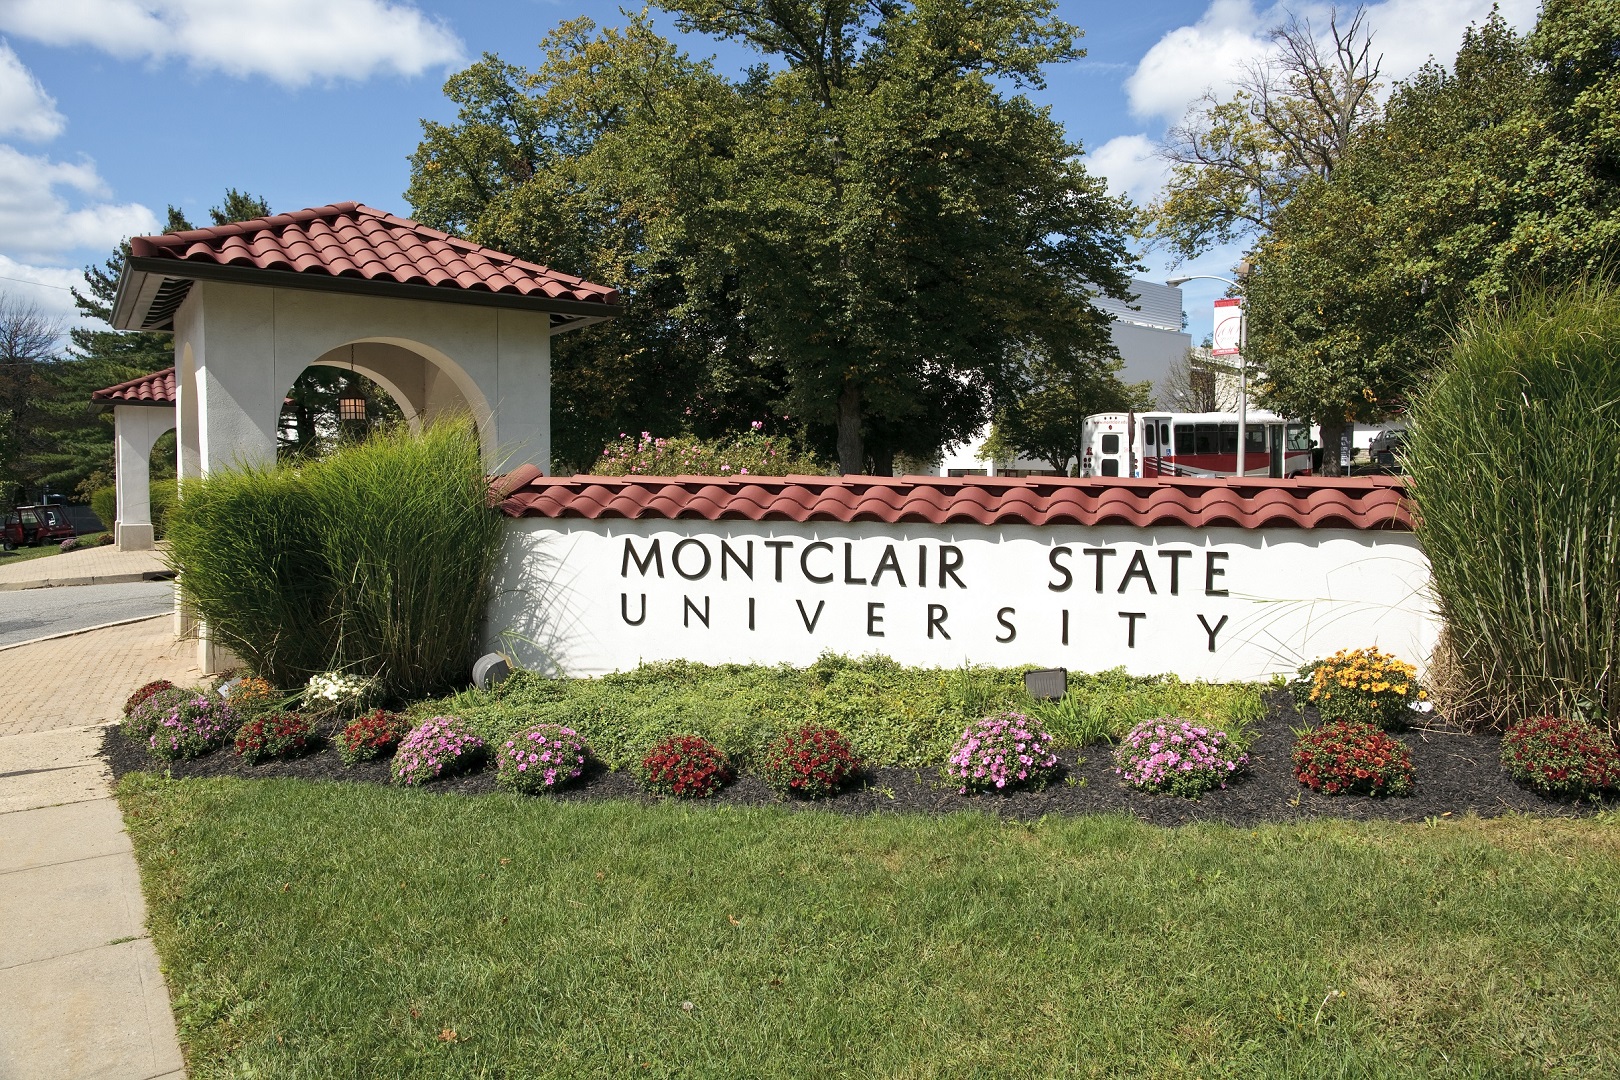 what is the essay prompt for montclair state university